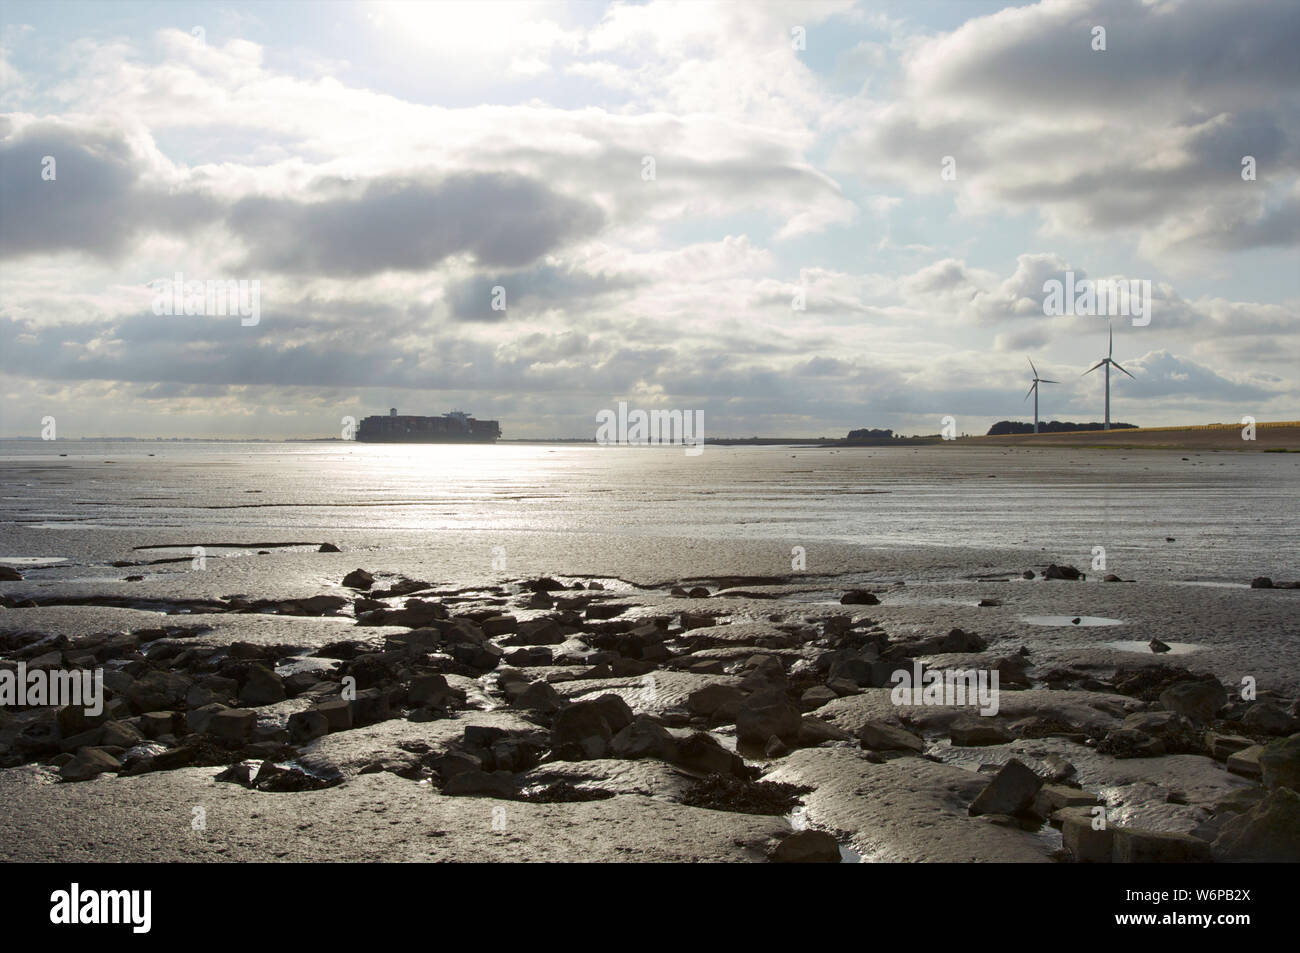 Low tide with sandbars visible at the Wester Schelde while a container ship passes over the Western Scheldt on its way to Antwerp, The Netherlands Stock Photo